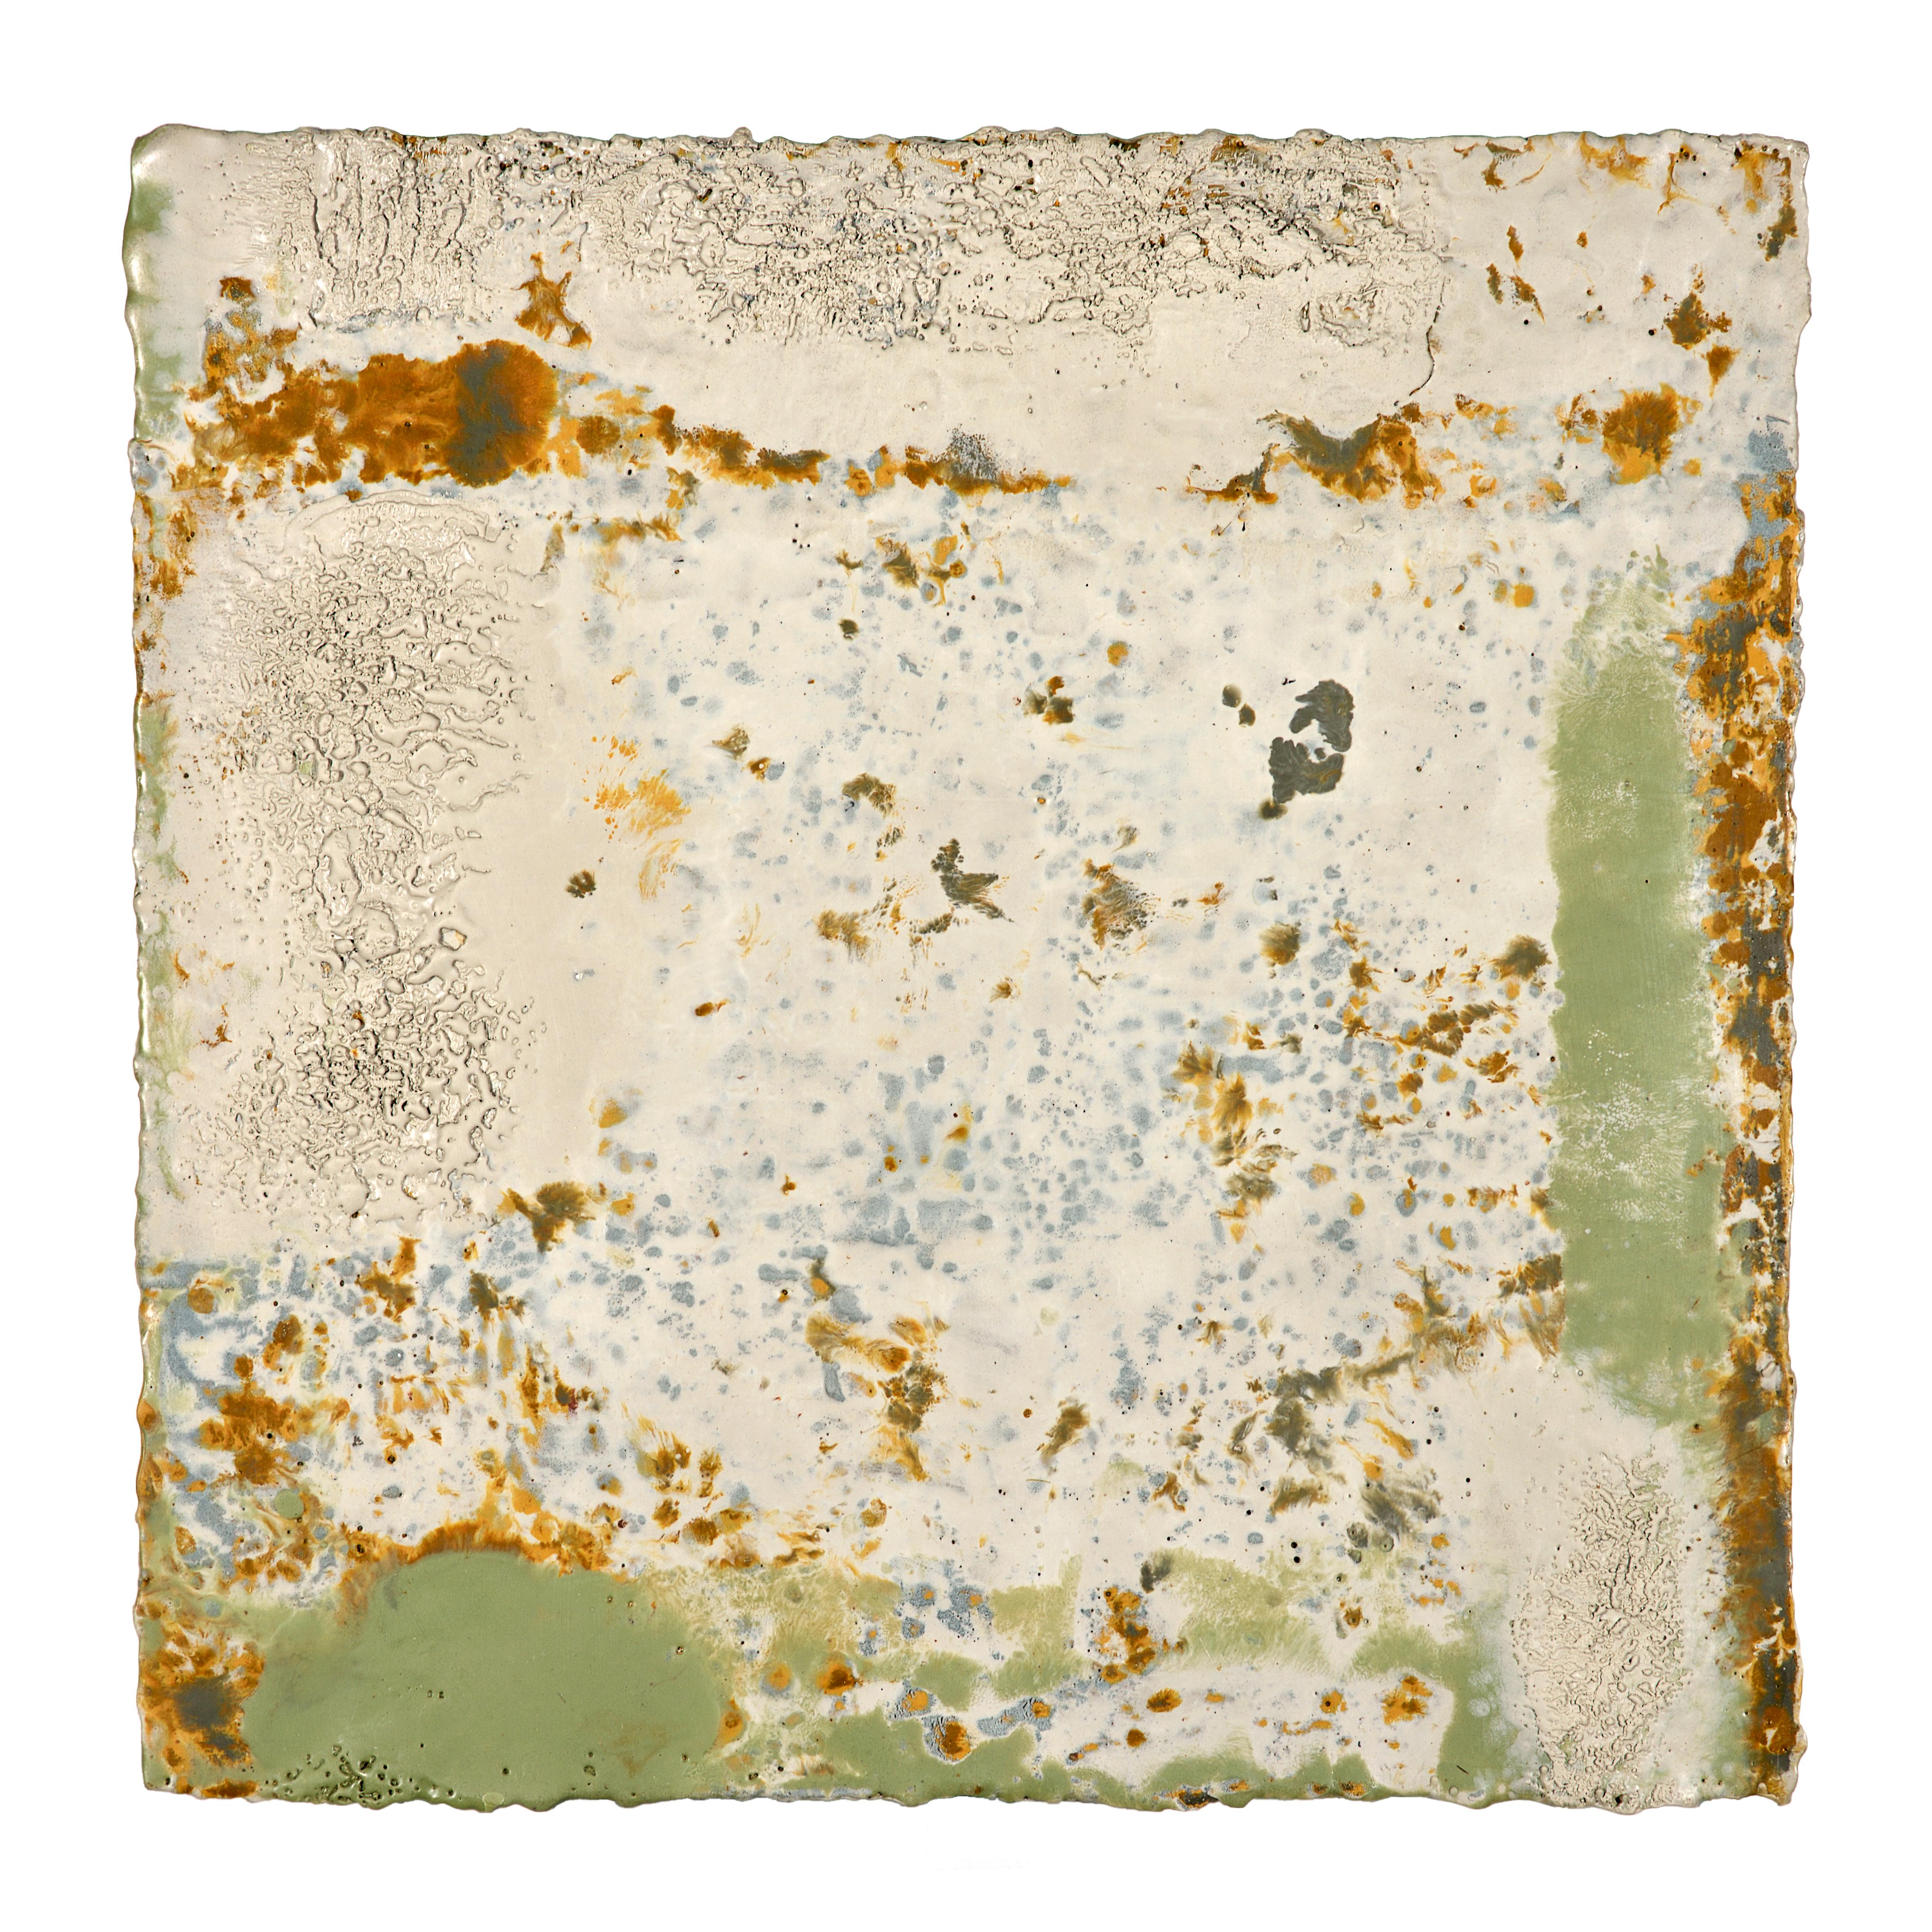 Modern Richard Hirsch Encaustic Painting of Nothing #77, 2021 For Sale